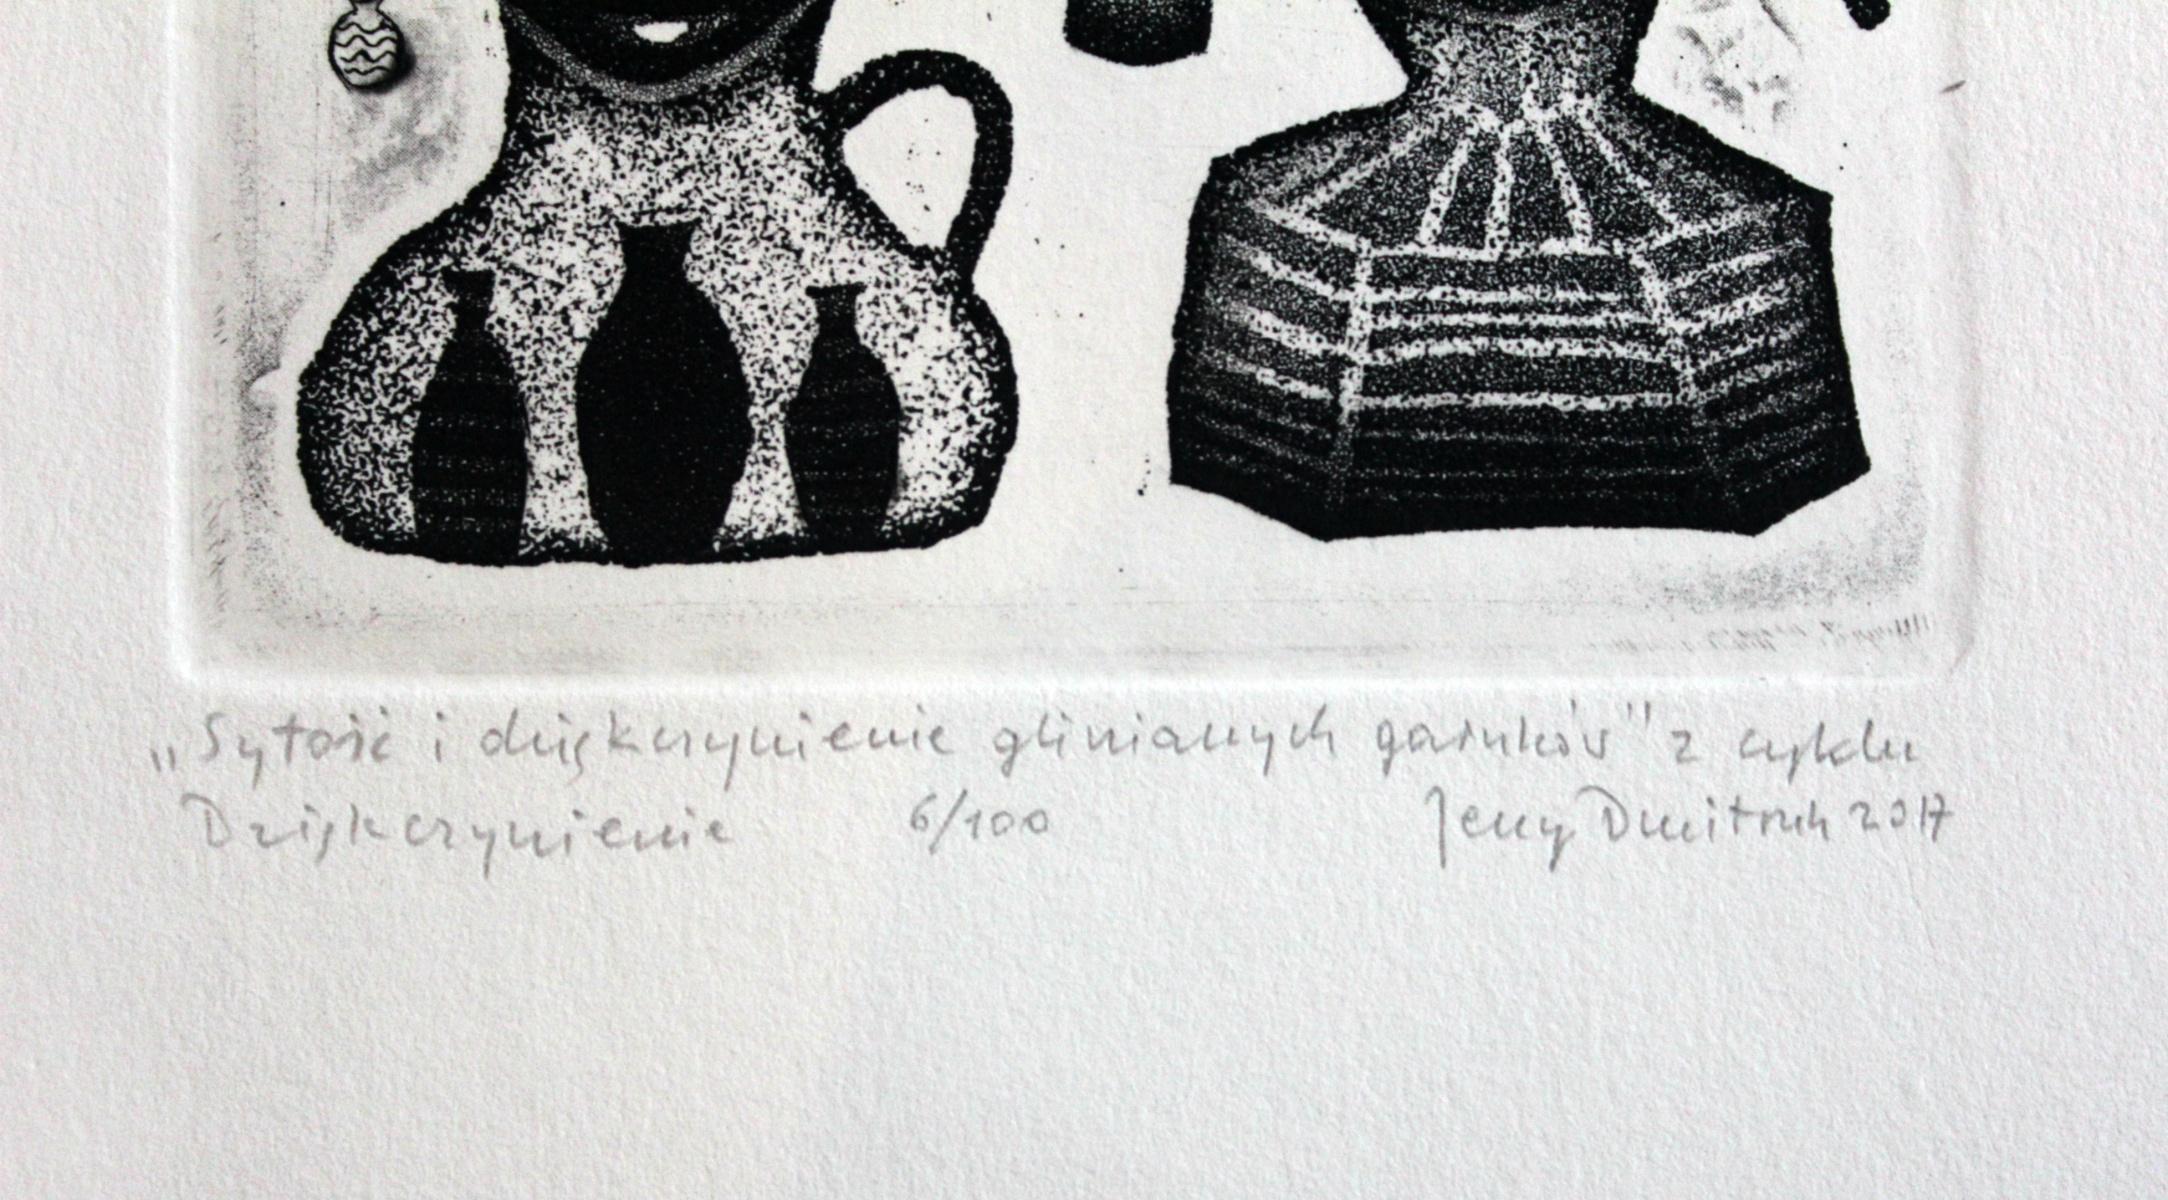 Satiety and thanksgiving of clay pots - XXI century, Black and white etching - Gray Figurative Print by Jerzy Dmitruk